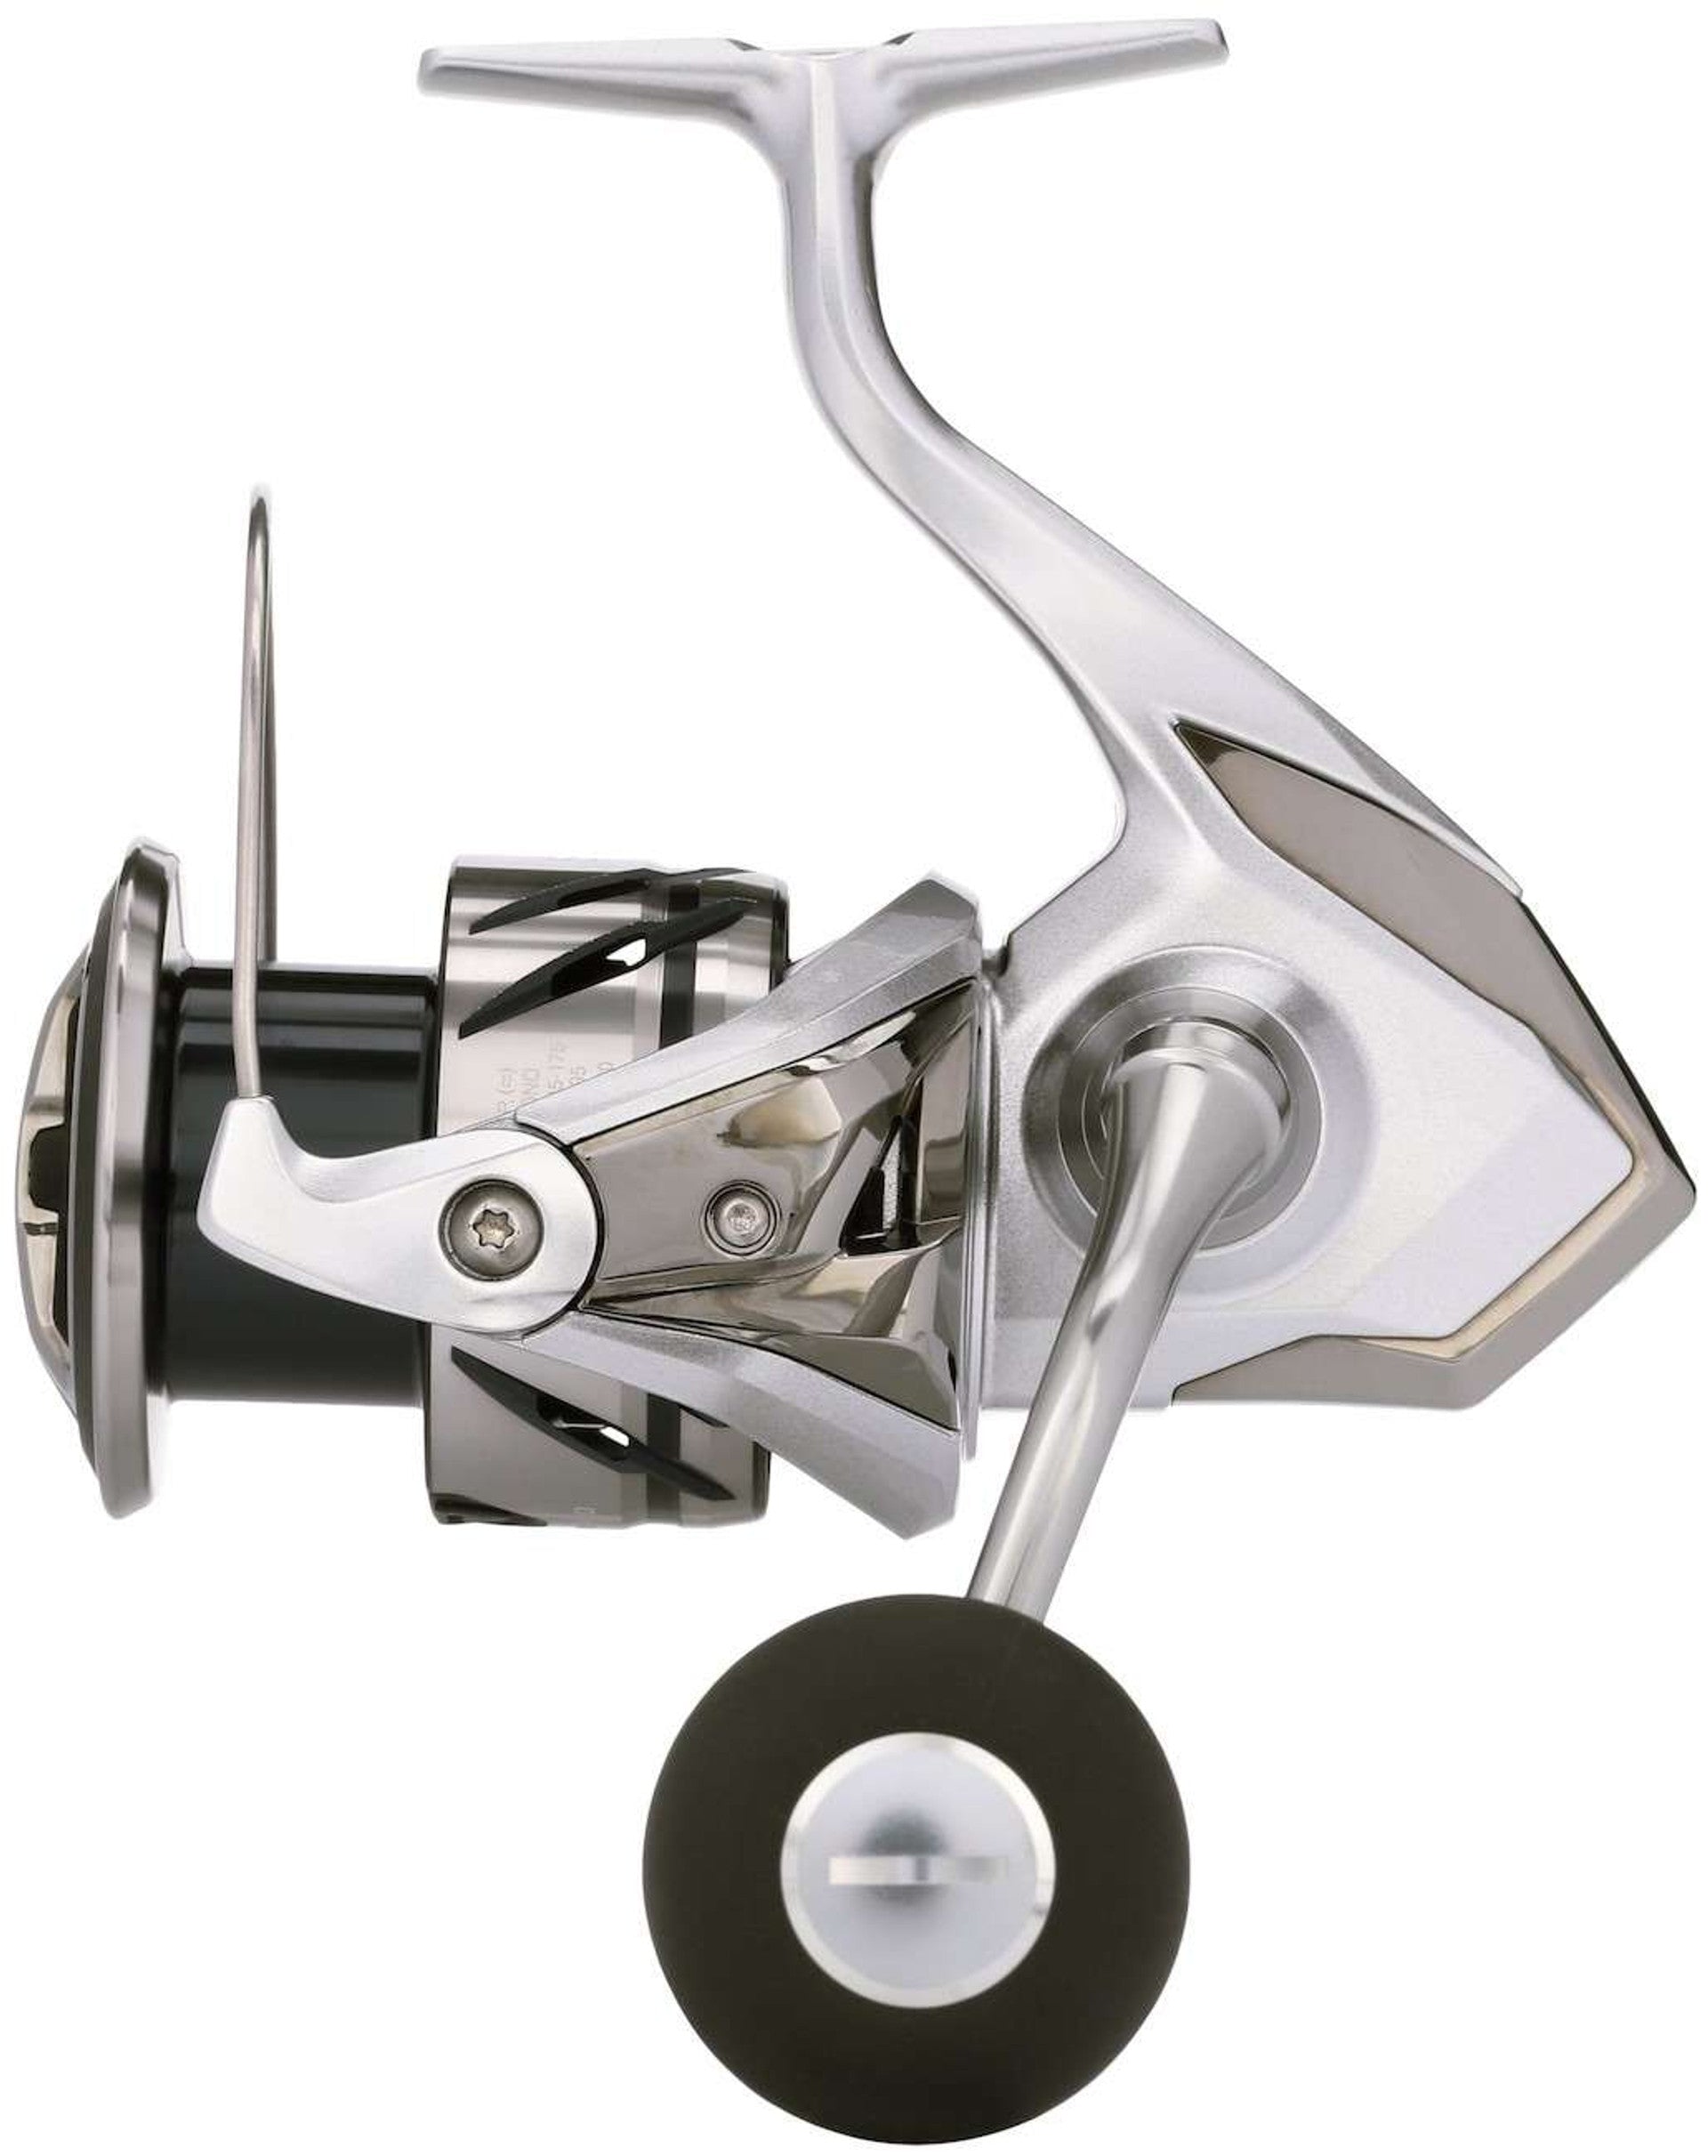 DAM QUICK FTS 655 FS Spinning Reel with free spool system # Lot F91